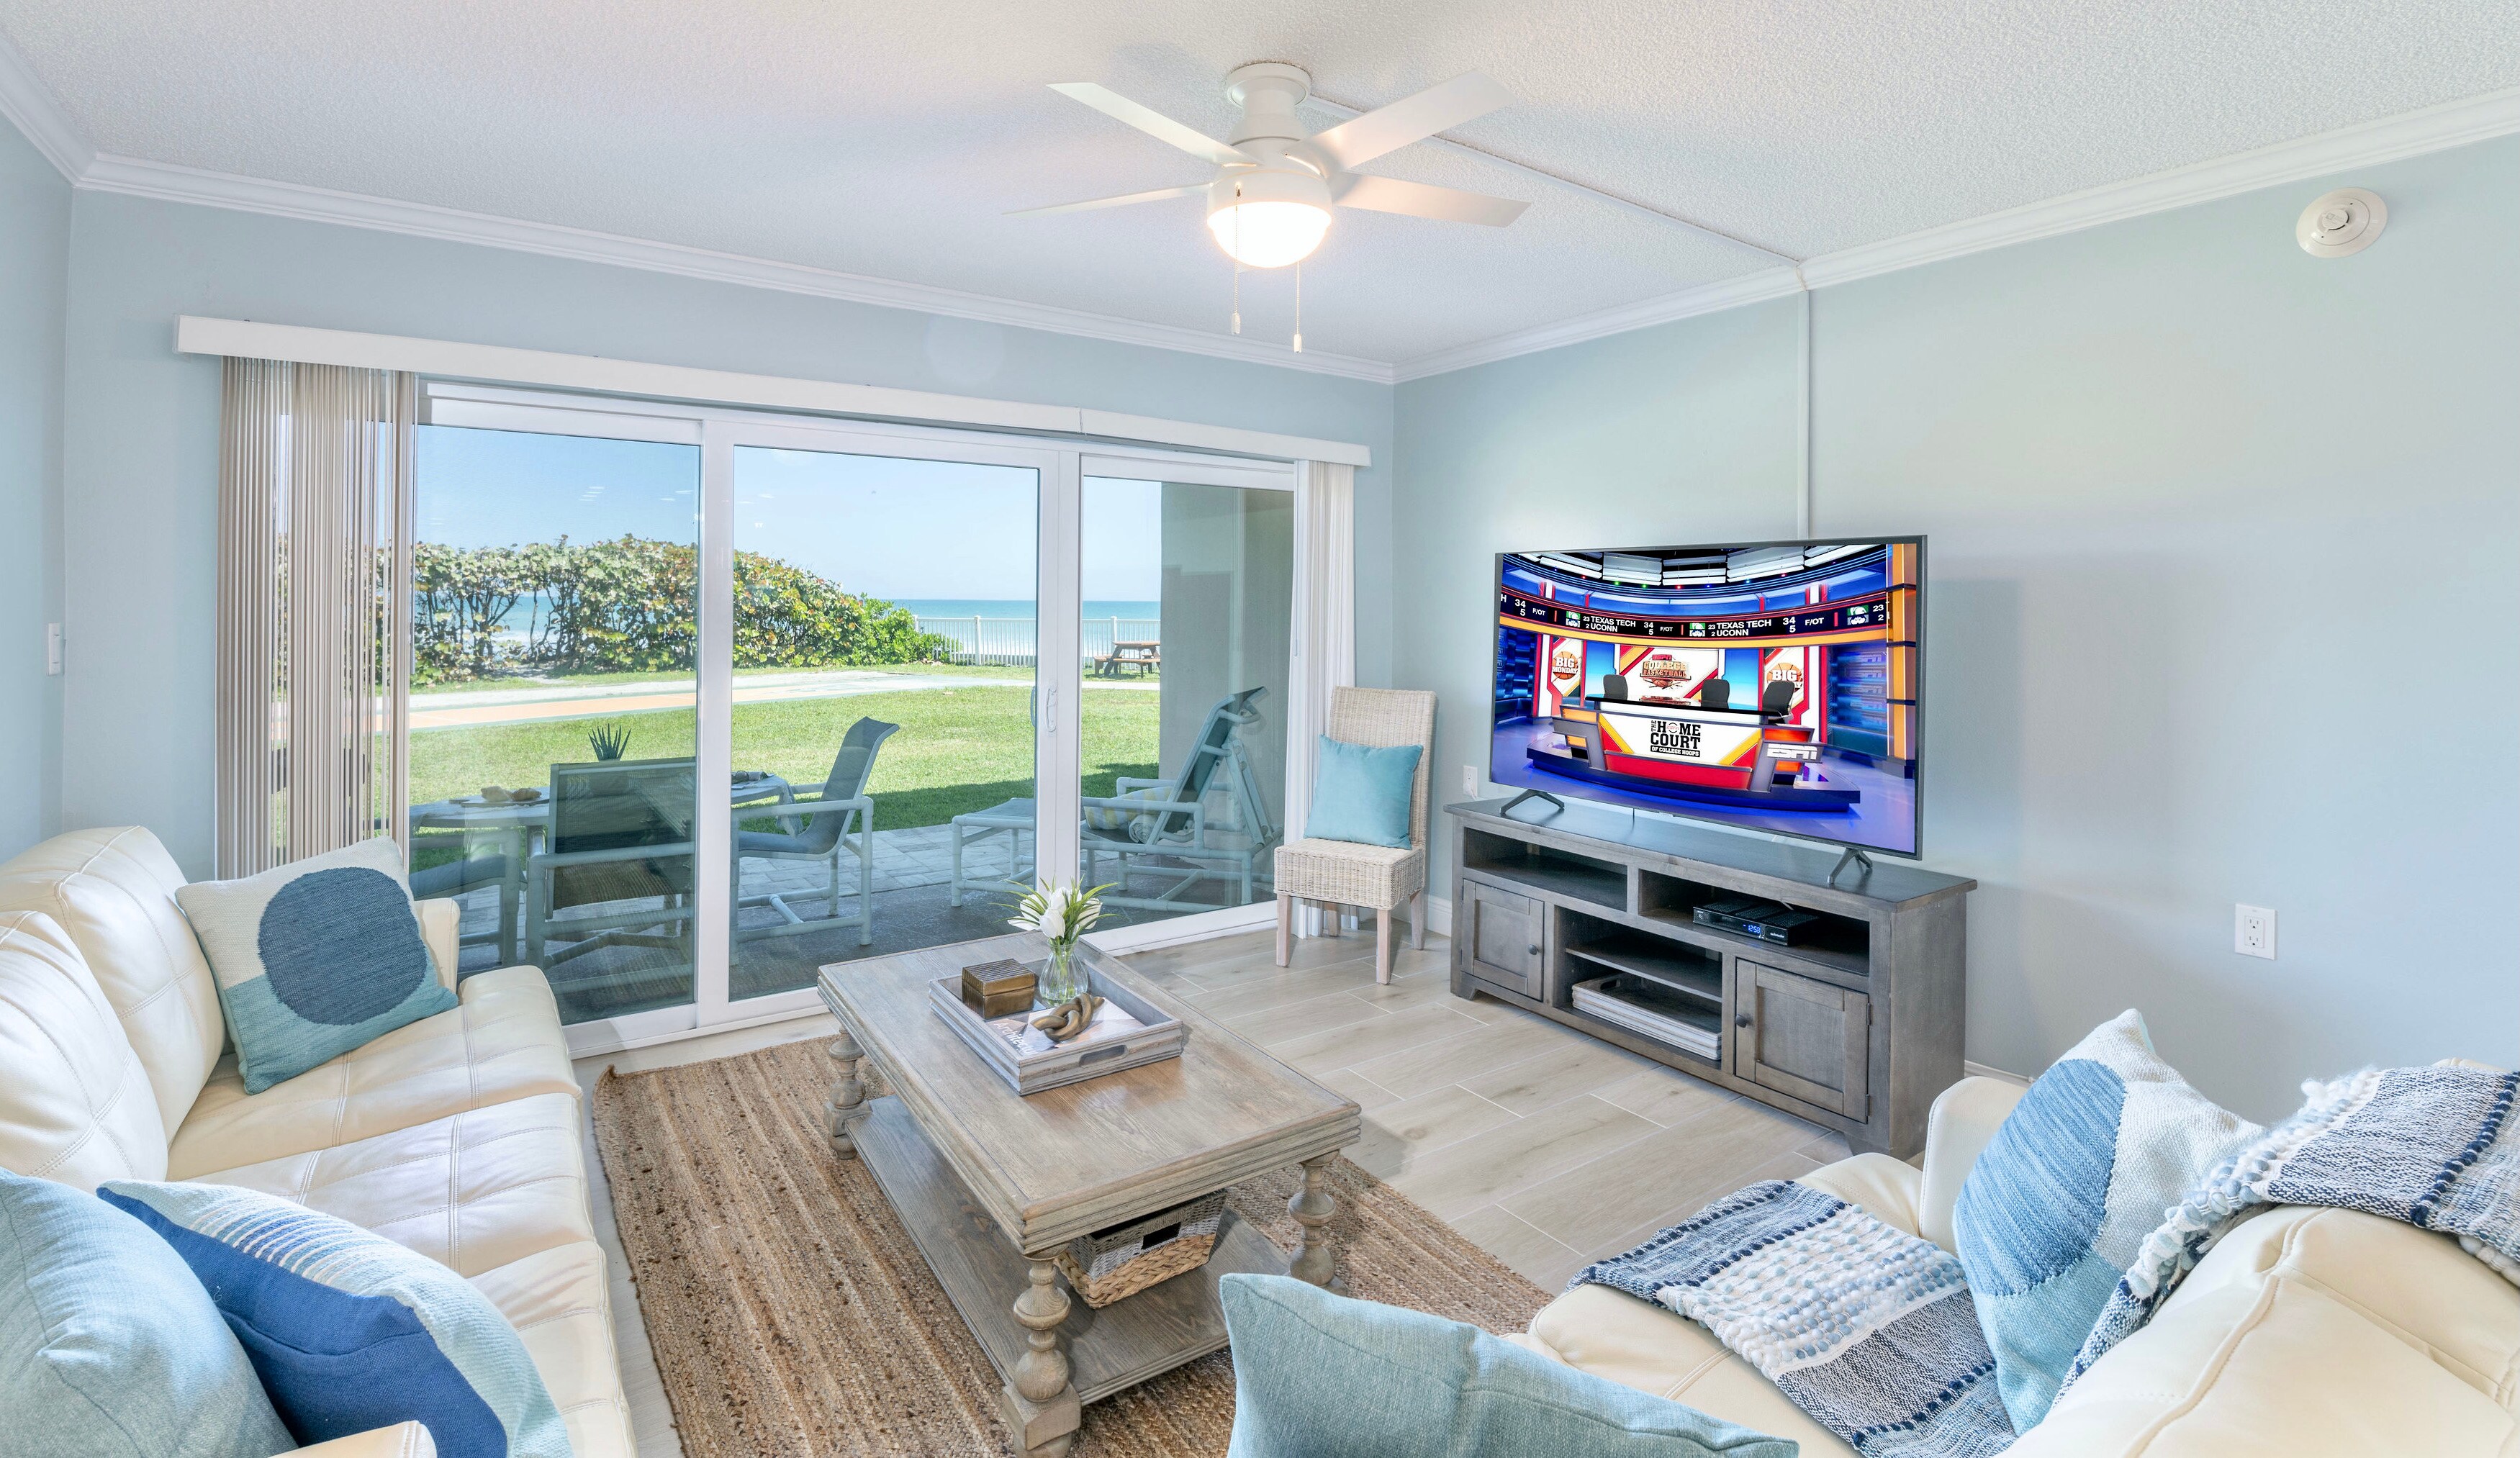 Walk right out to the ocean! Enjoy views of the ocean or your big screen TV right from your living room.